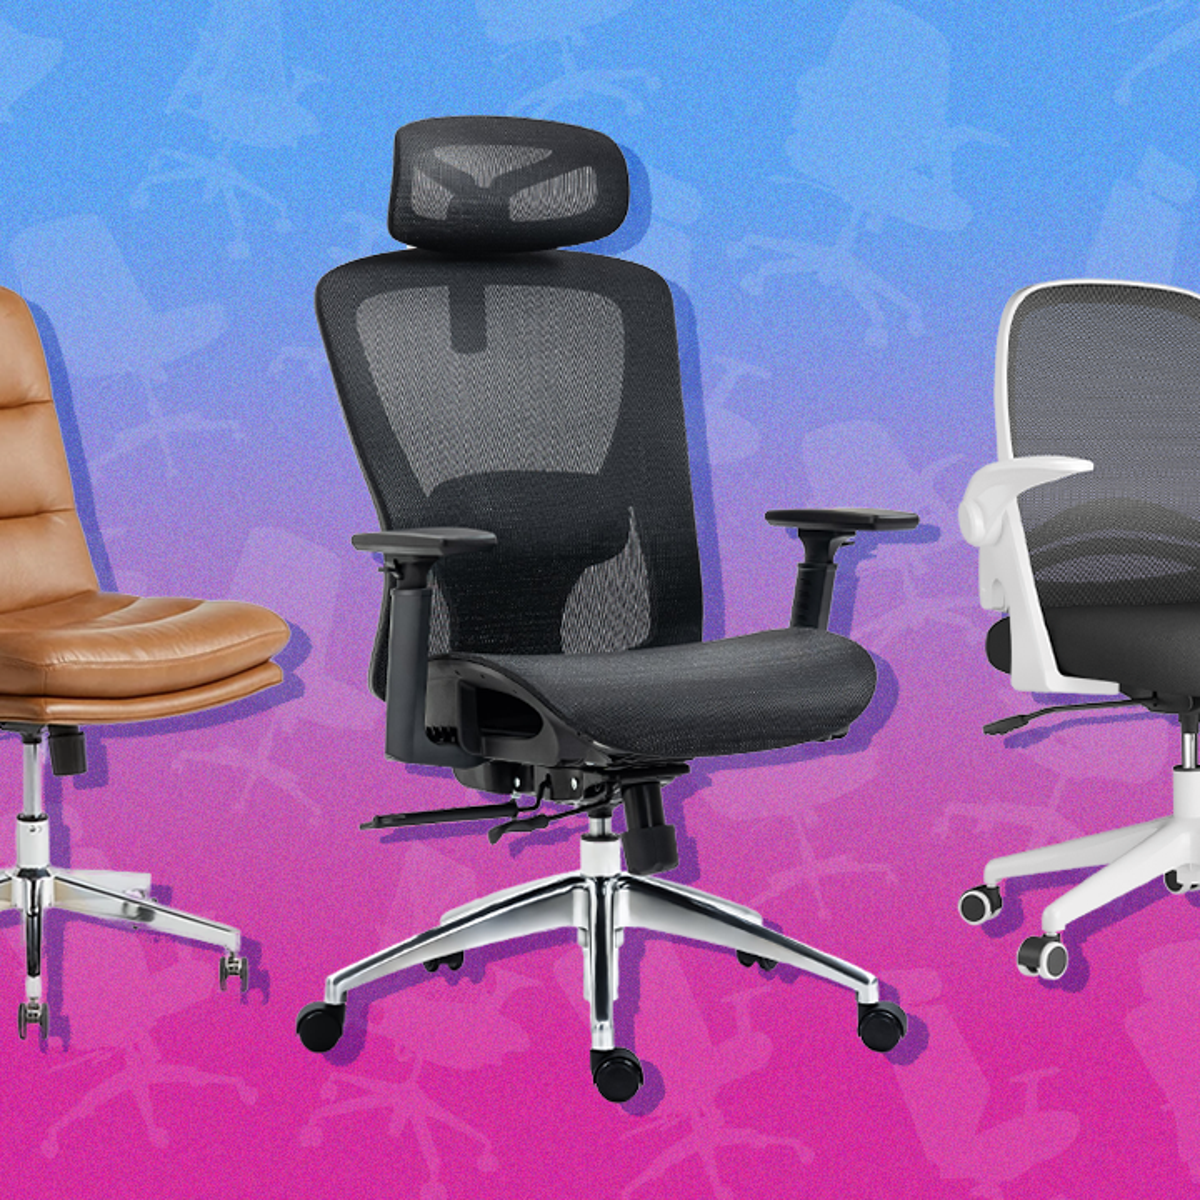 https://static.independent.co.uk/2023/11/06/14/best%20ergonomic%20office%20chairs.png?width=1200&height=1200&fit=crop